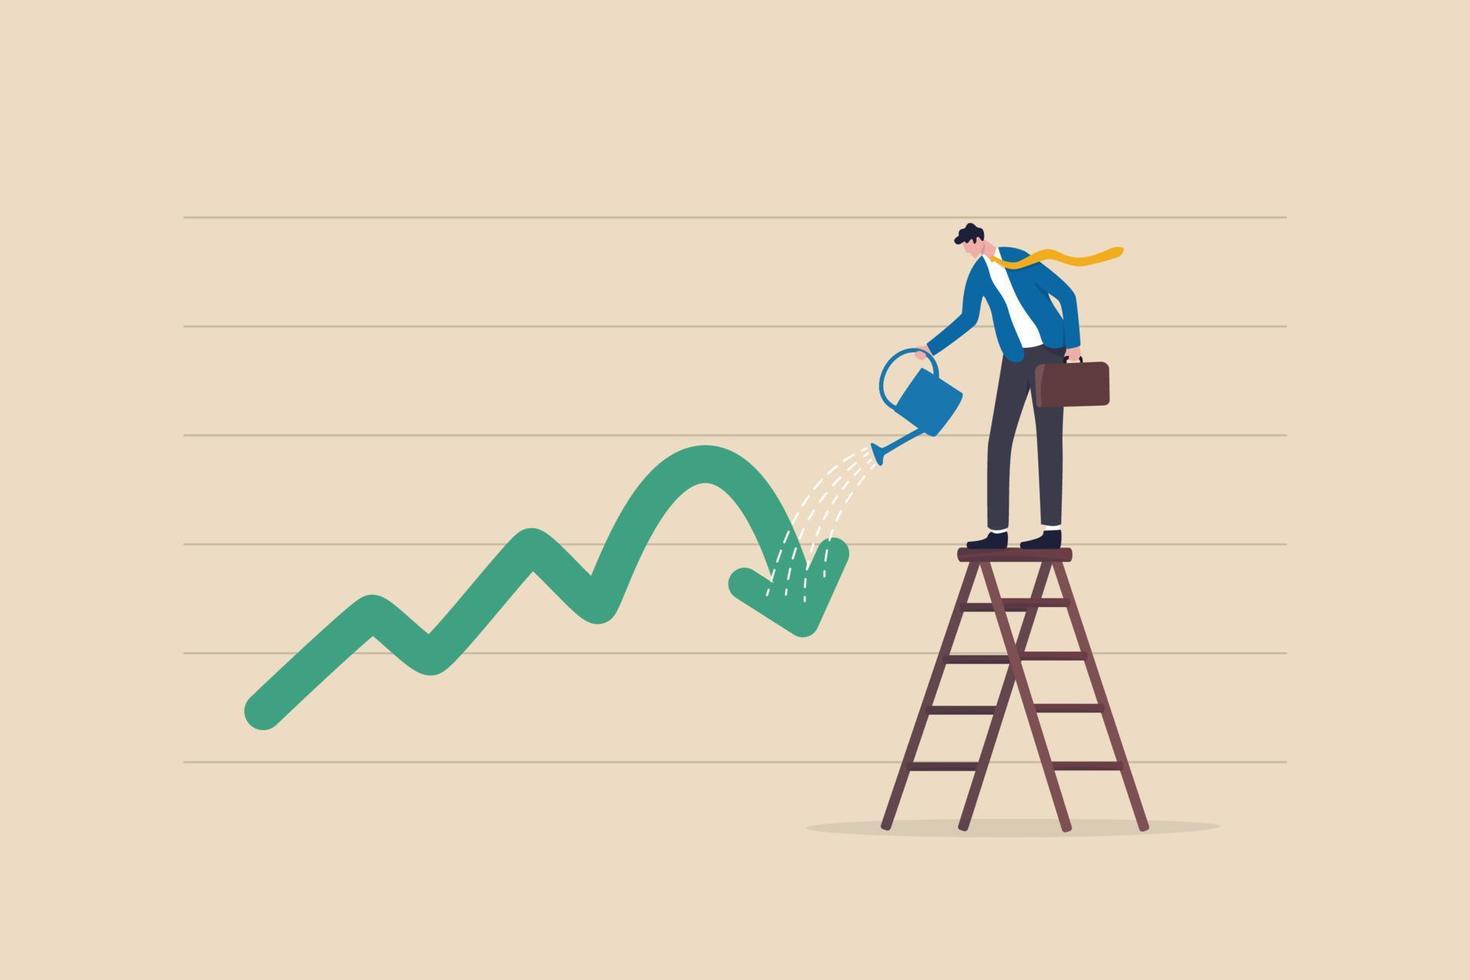 Growing investment from loss or recession, stimulate or boost profit and earning from stock market crisis or downturn concept, businessman investor watering fall down graph and chart to make it grow. vector